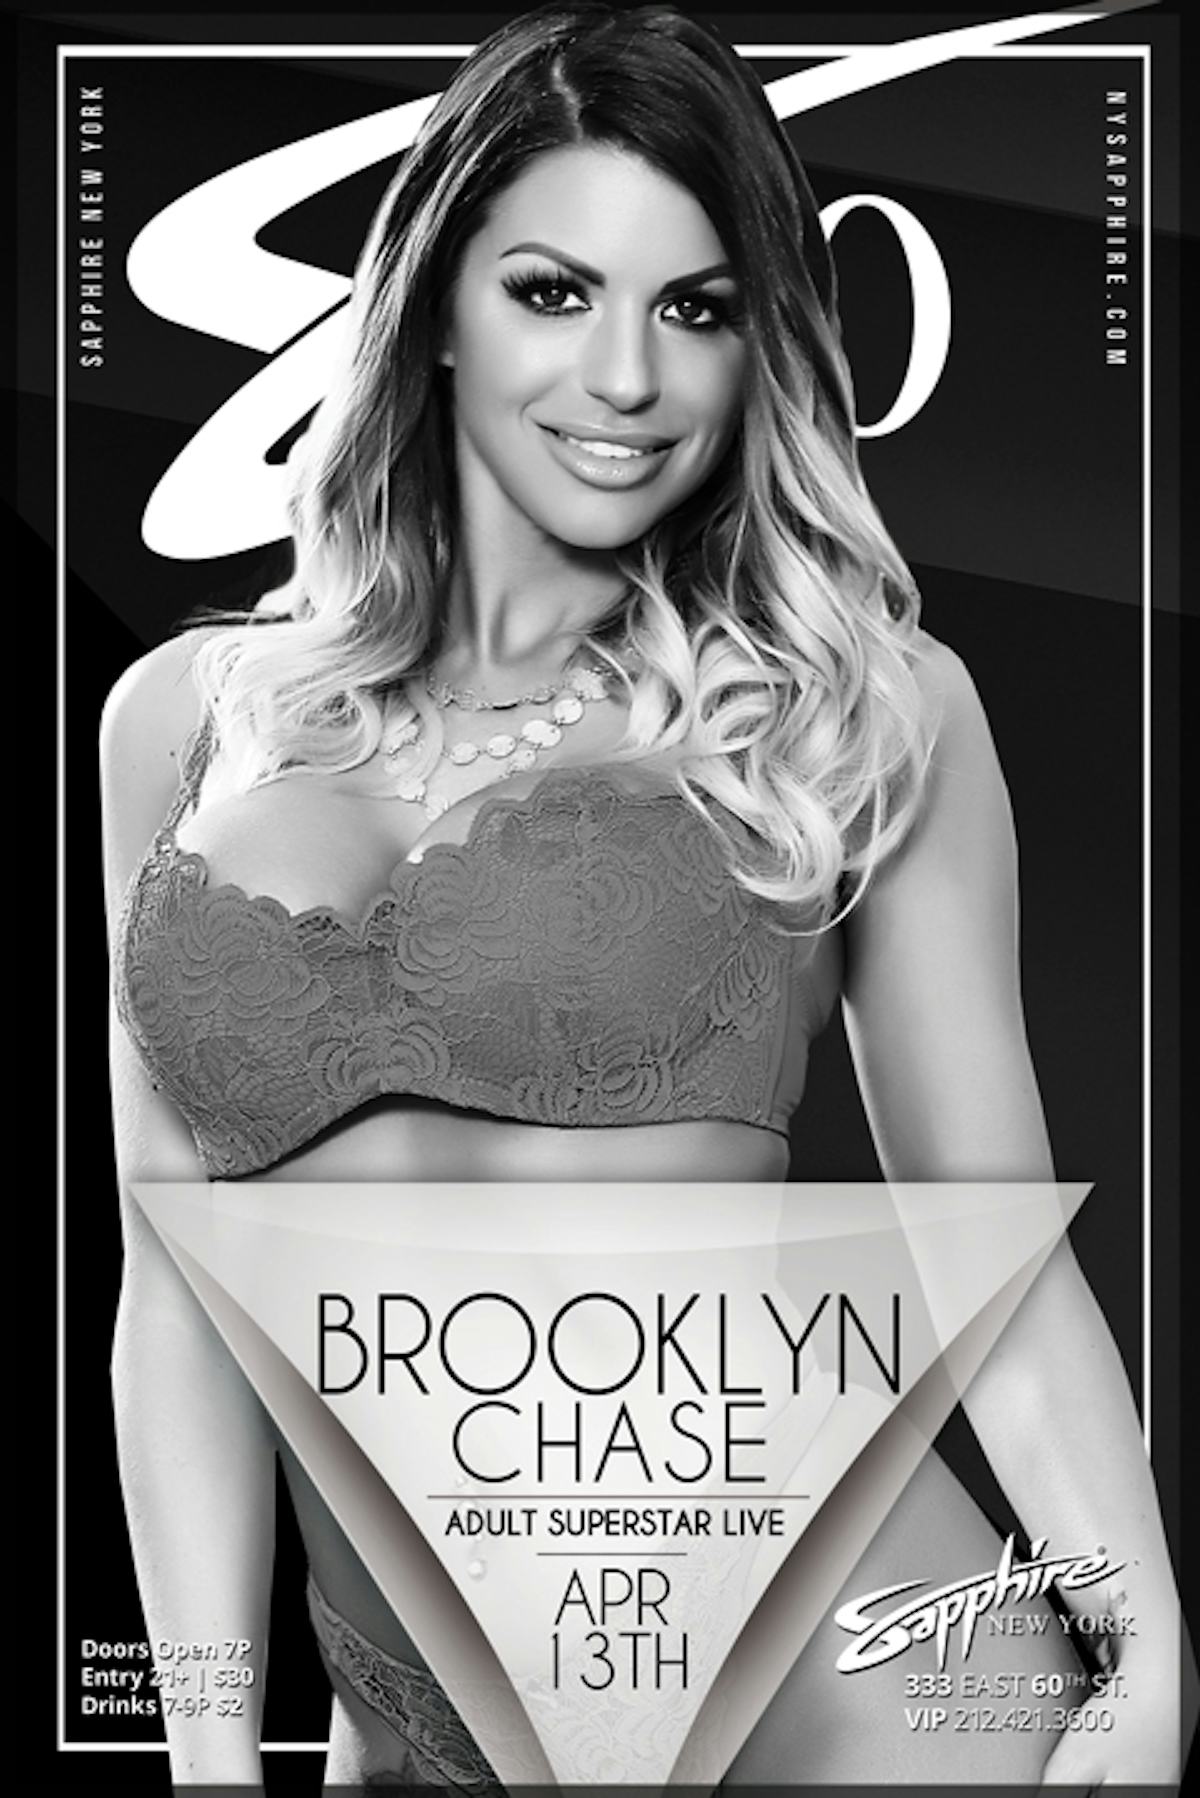 Tablelist Buy Tickets And Tables To Brooklyn Chase Saturday 4 13 19 At Sapphire Ny At Sapphire 60